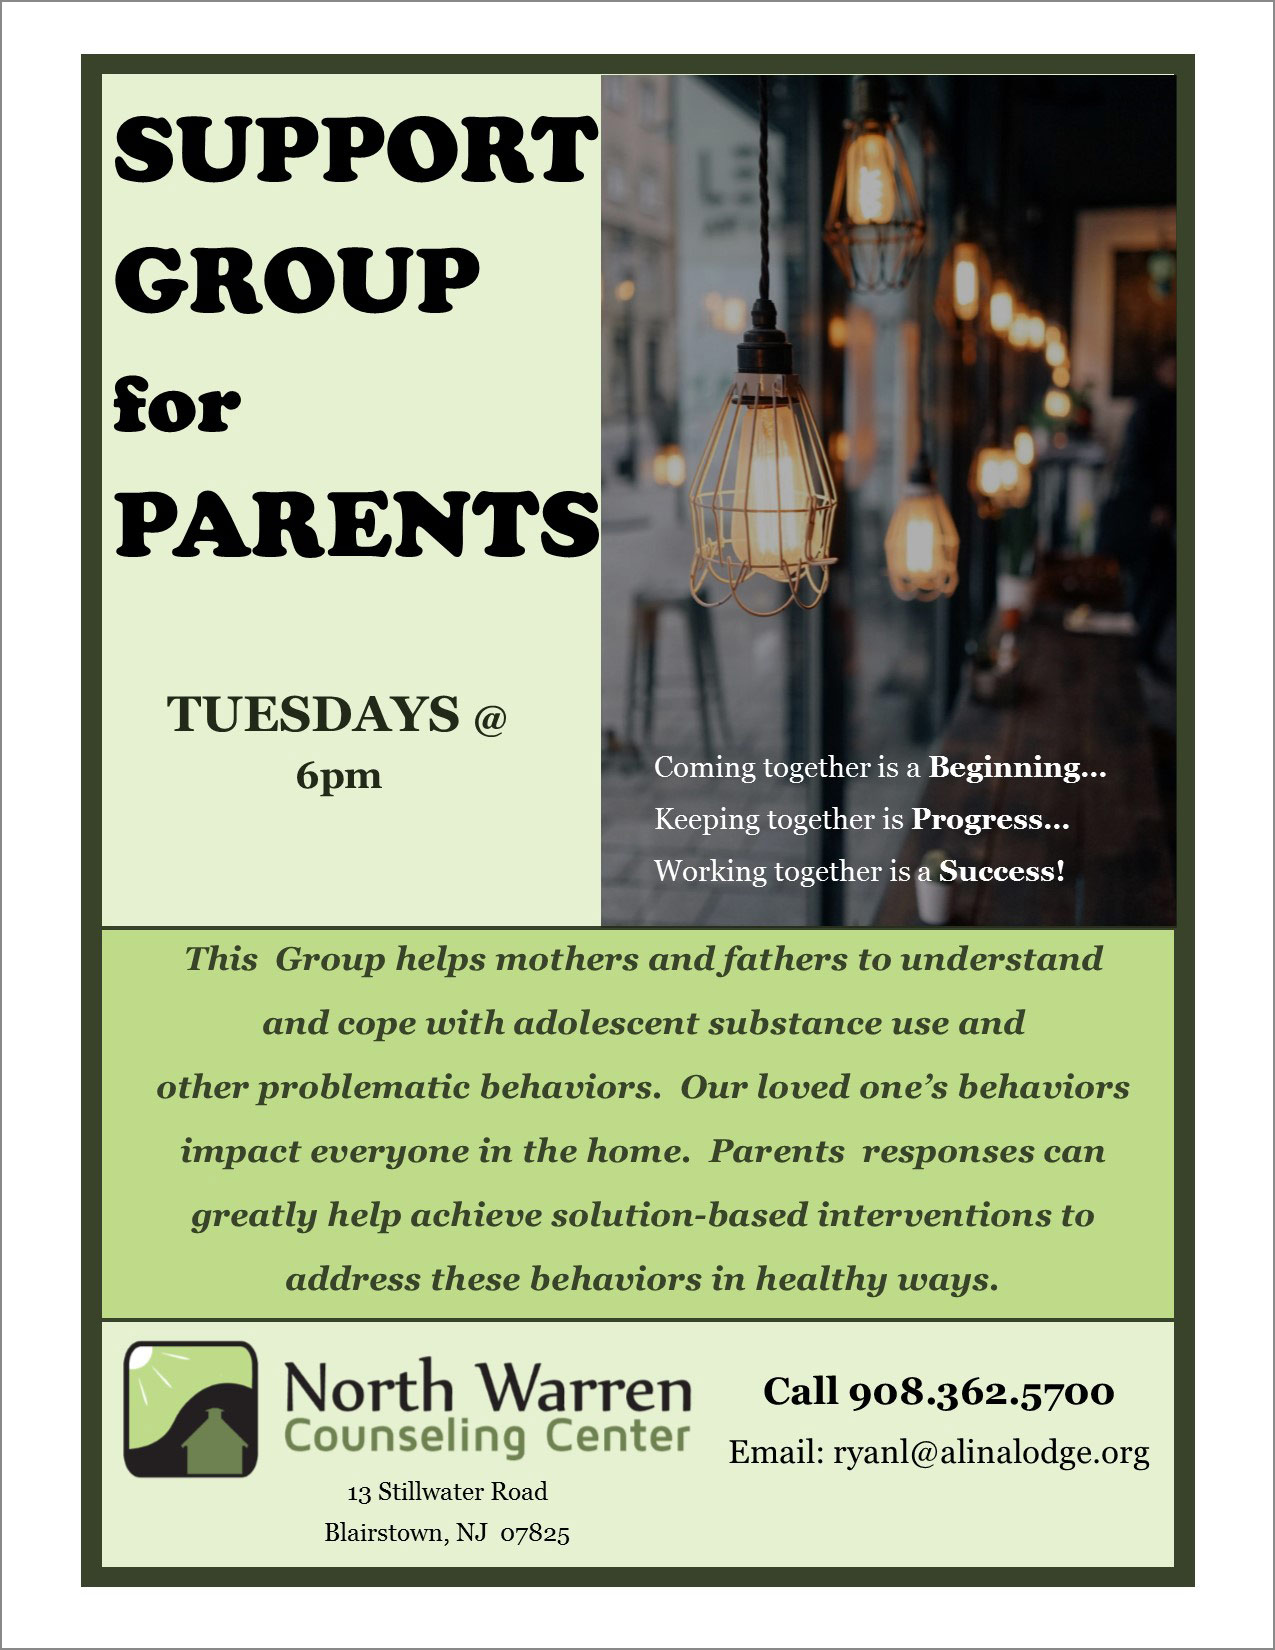 north warren counseling center parent's support group